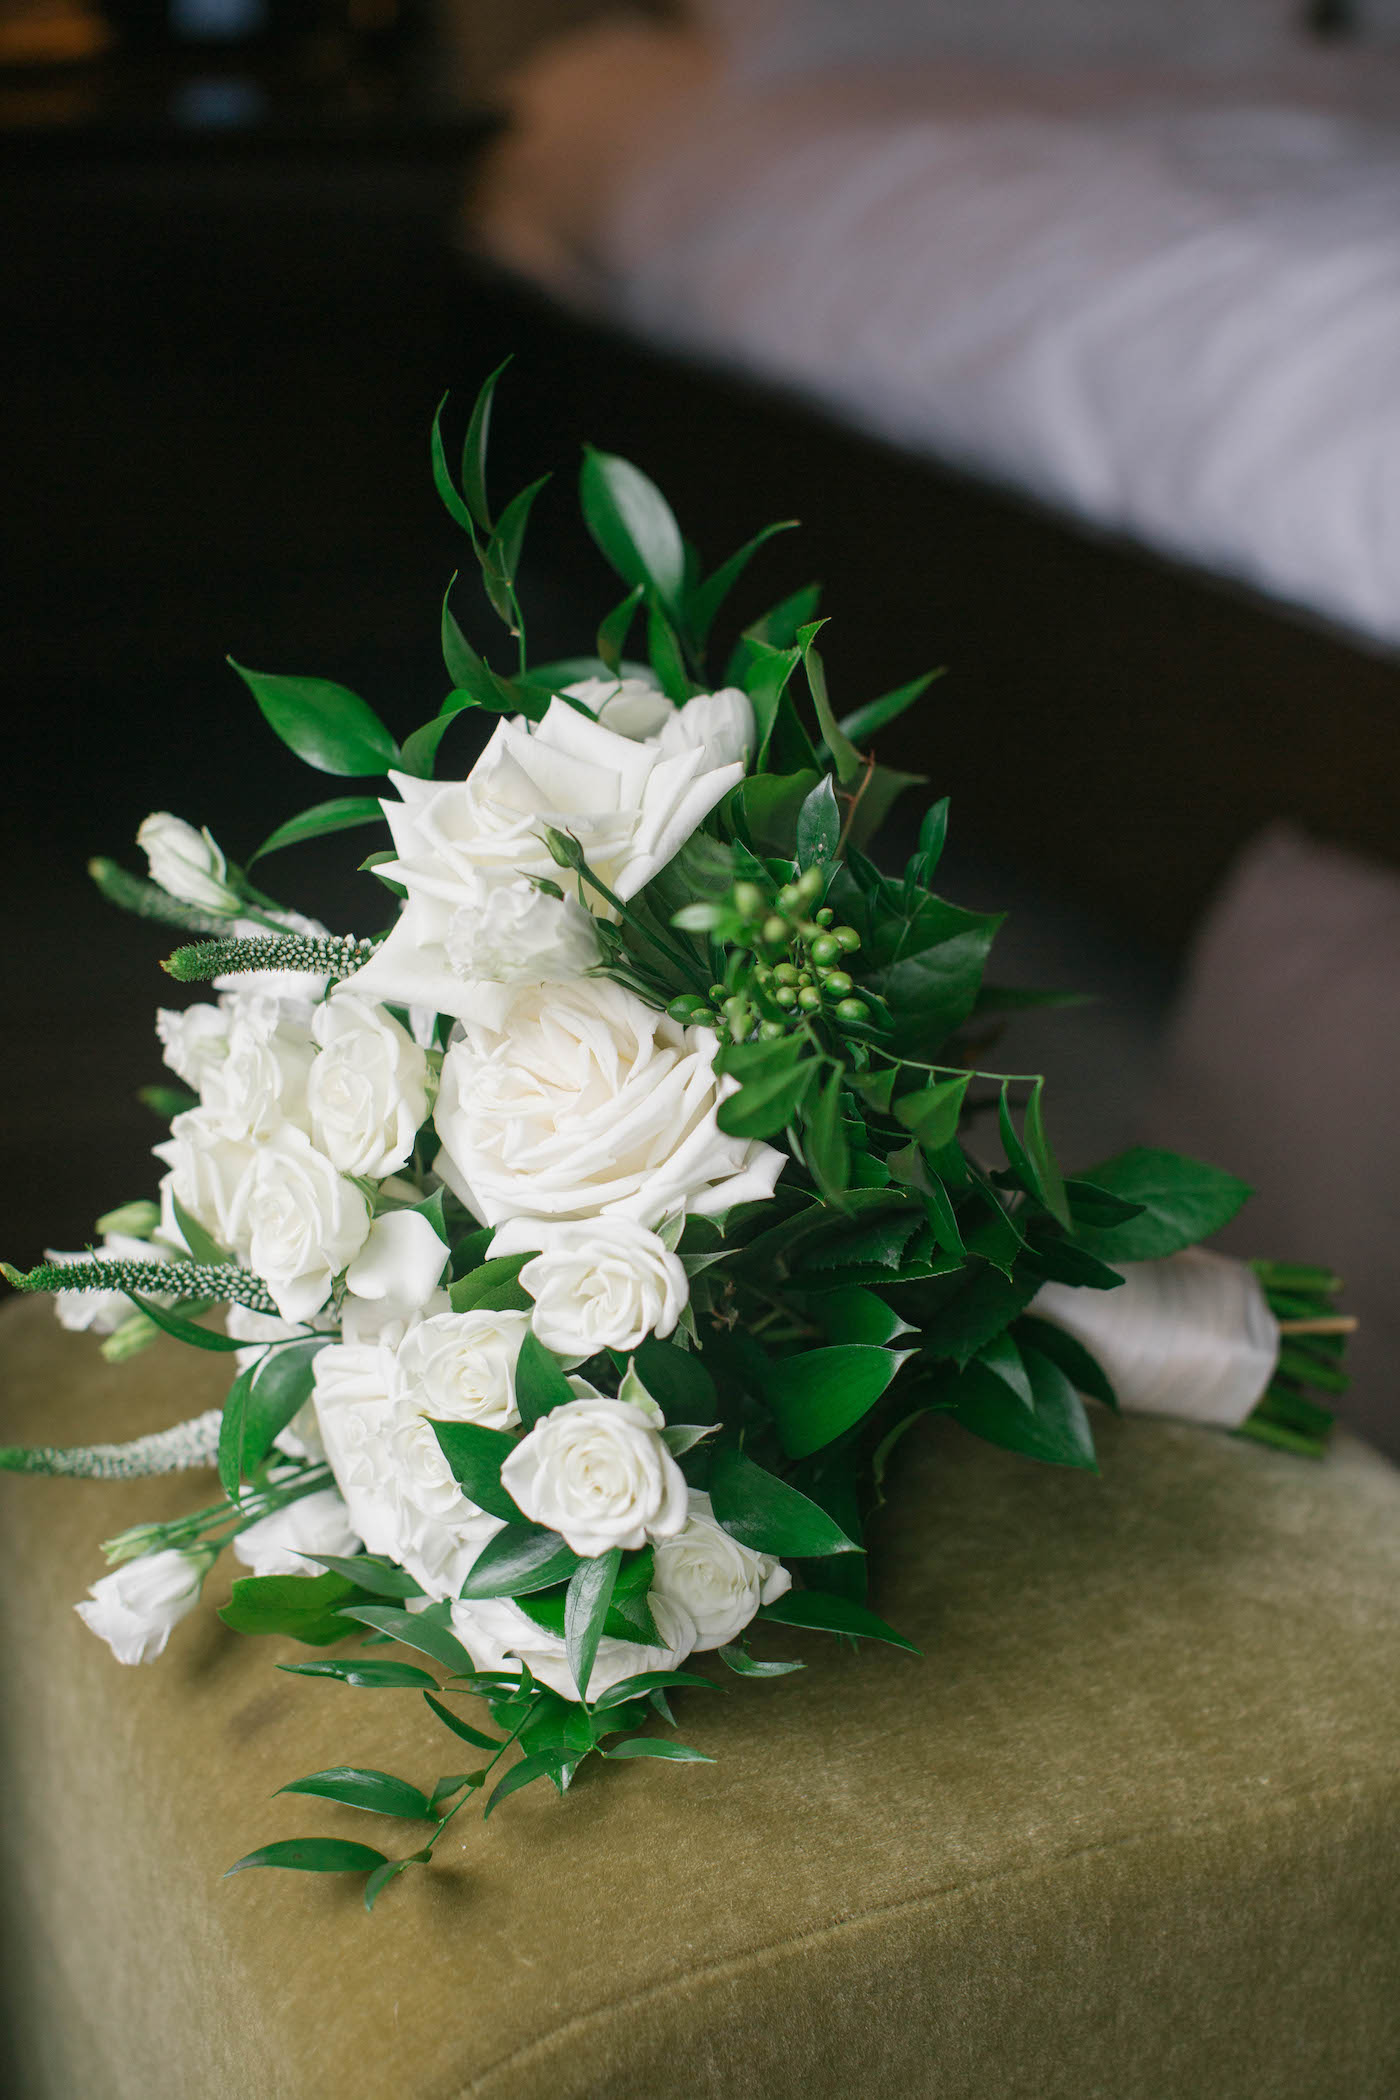 Classic Bridal Bouquet, Timeless Wedding Flowers with White Roses, Ivory Florals and Greenery | Tampa Bay Wedding Florist Bruce Wayne Florals | Wedding Planner Parties A'la Carte